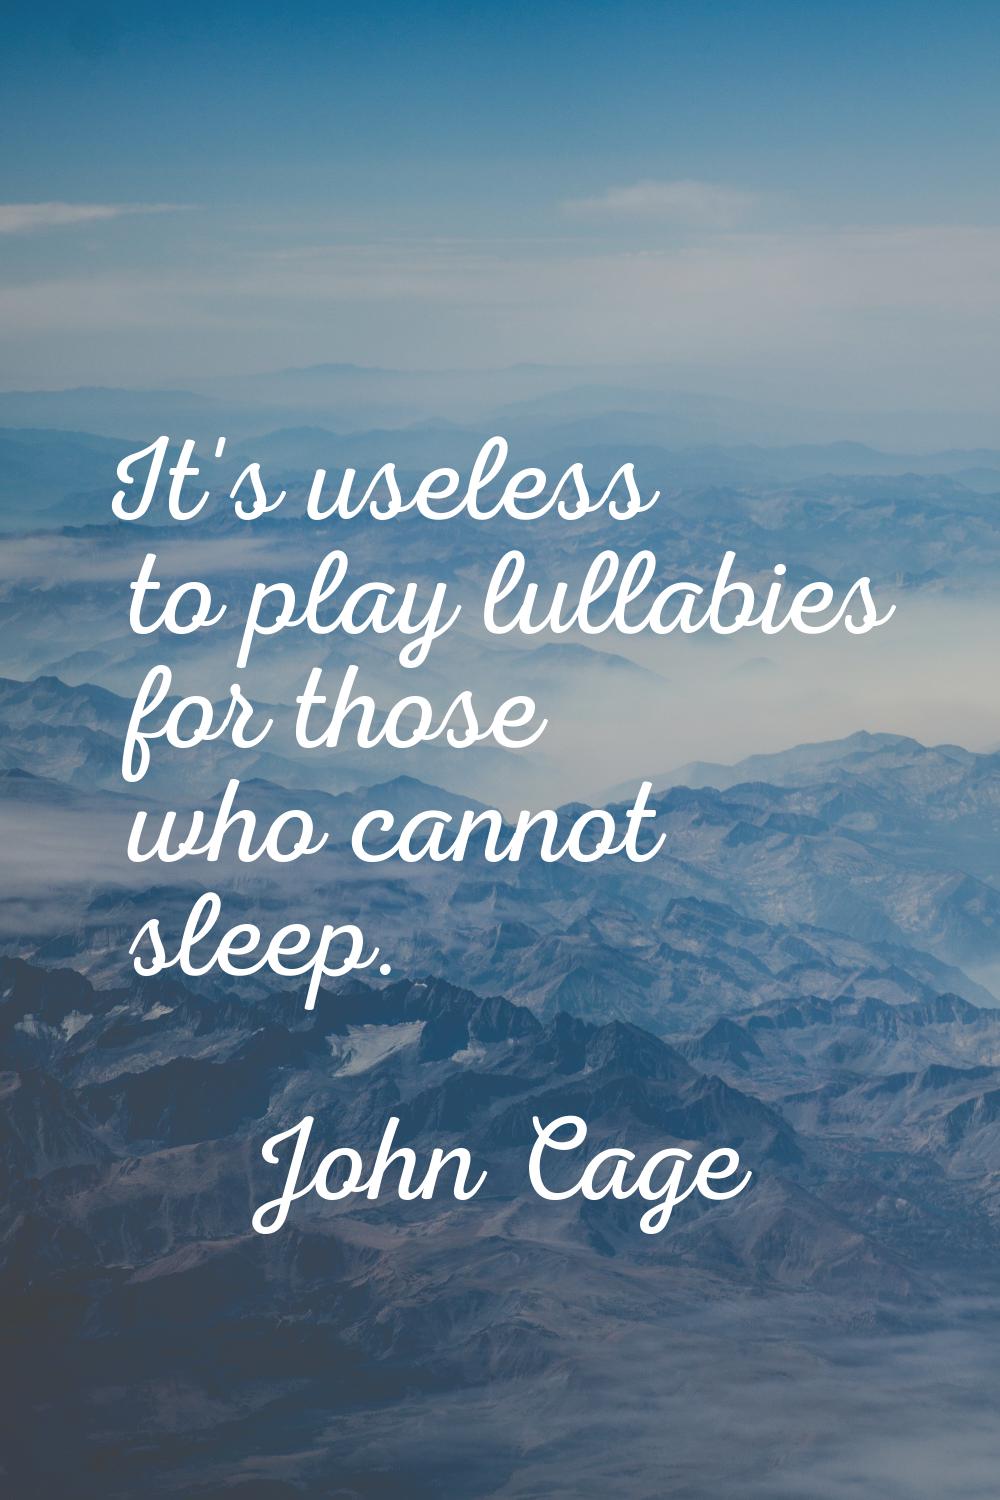 It's useless to play lullabies for those who cannot sleep.